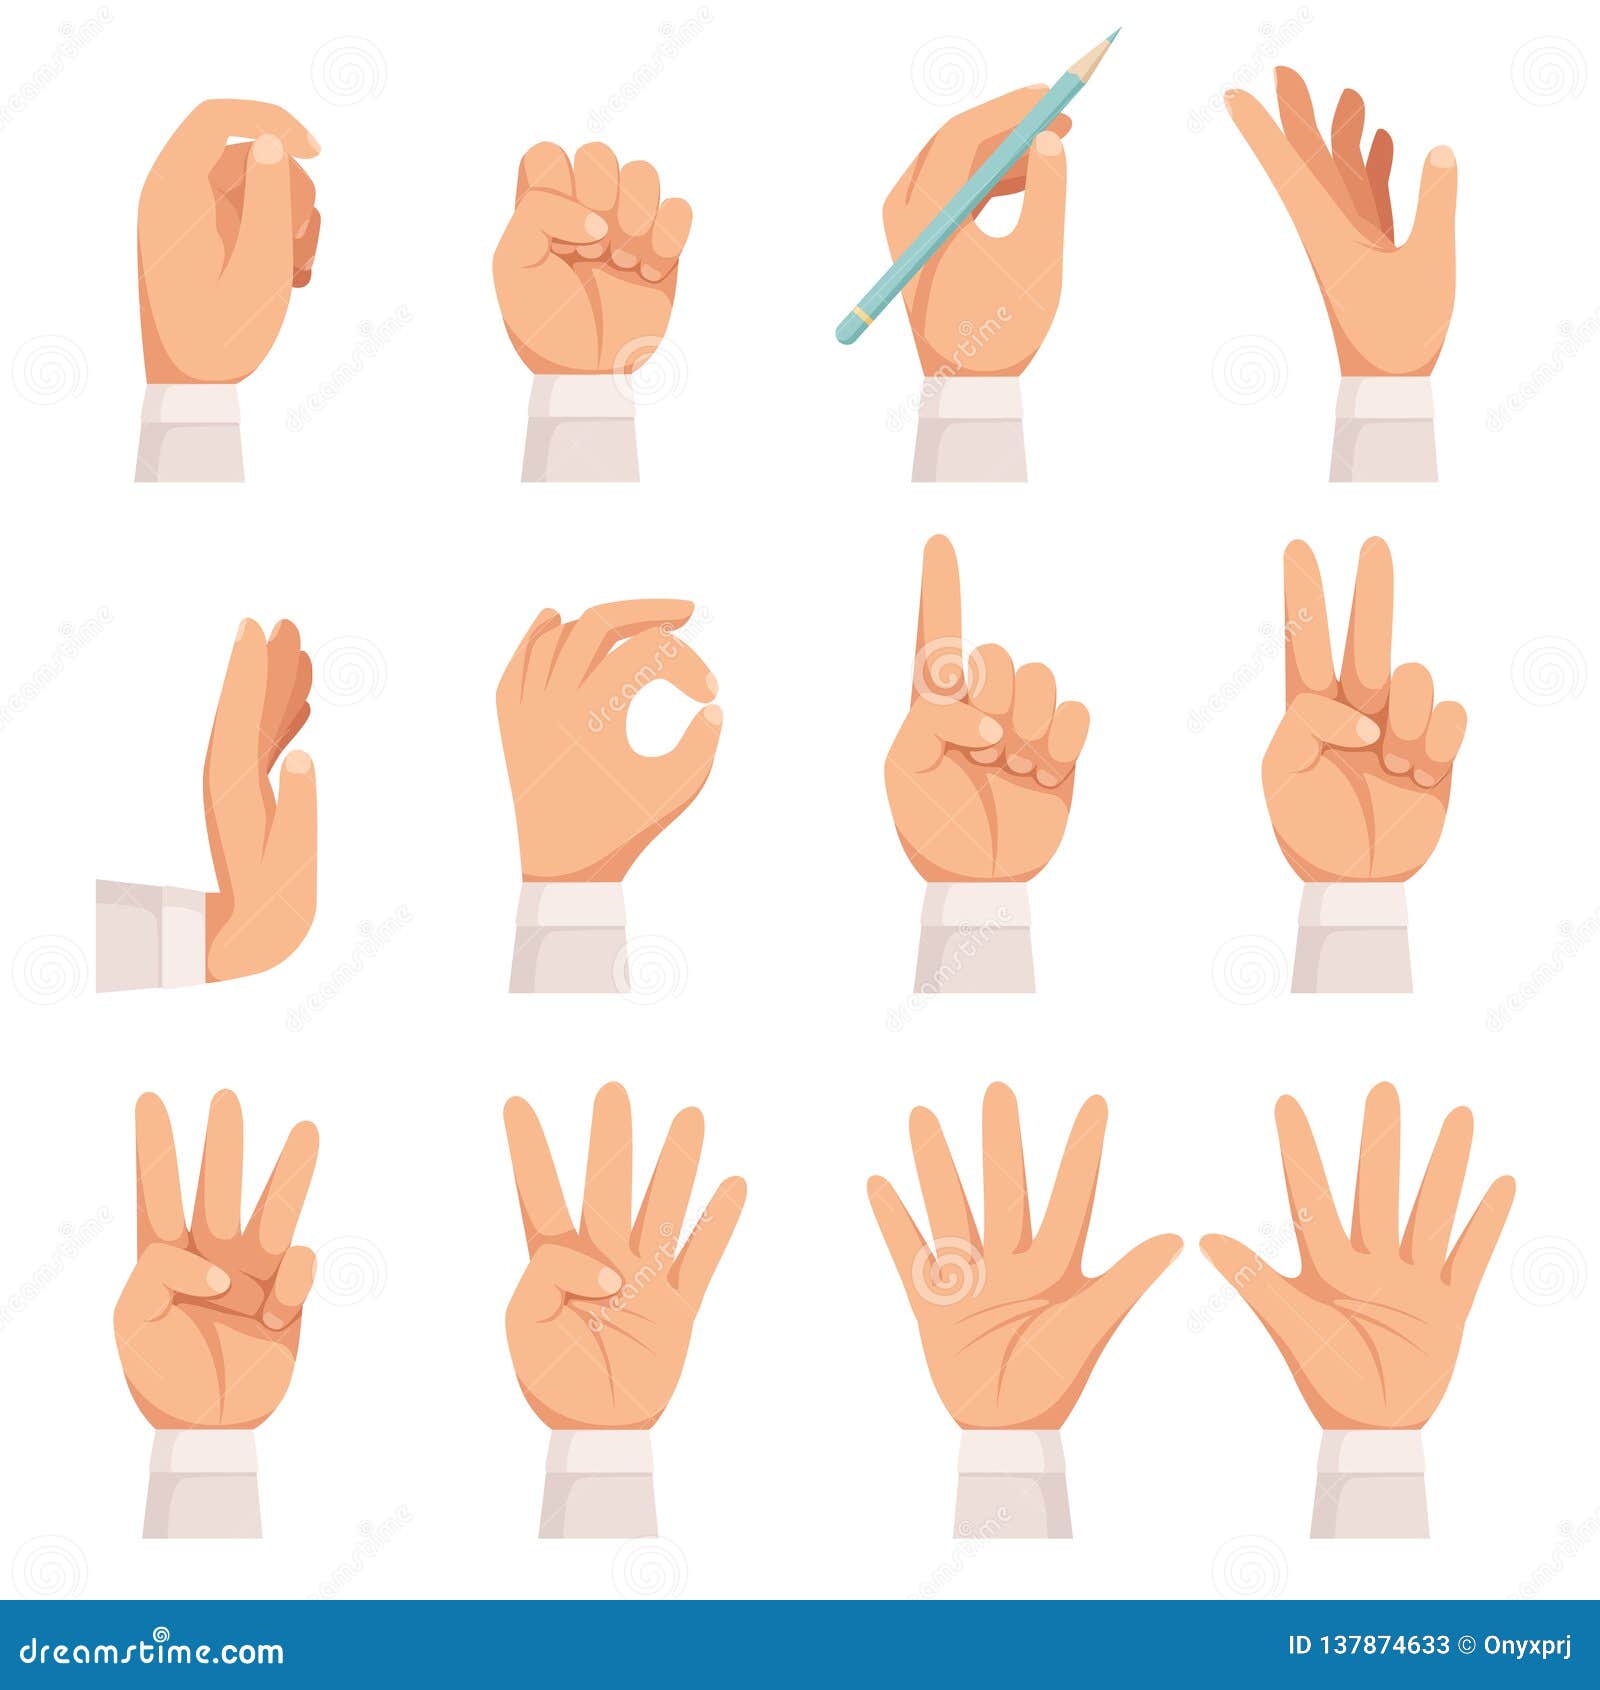 Hands Gesture Human Palm And Fingers Touch Showing Pointing And